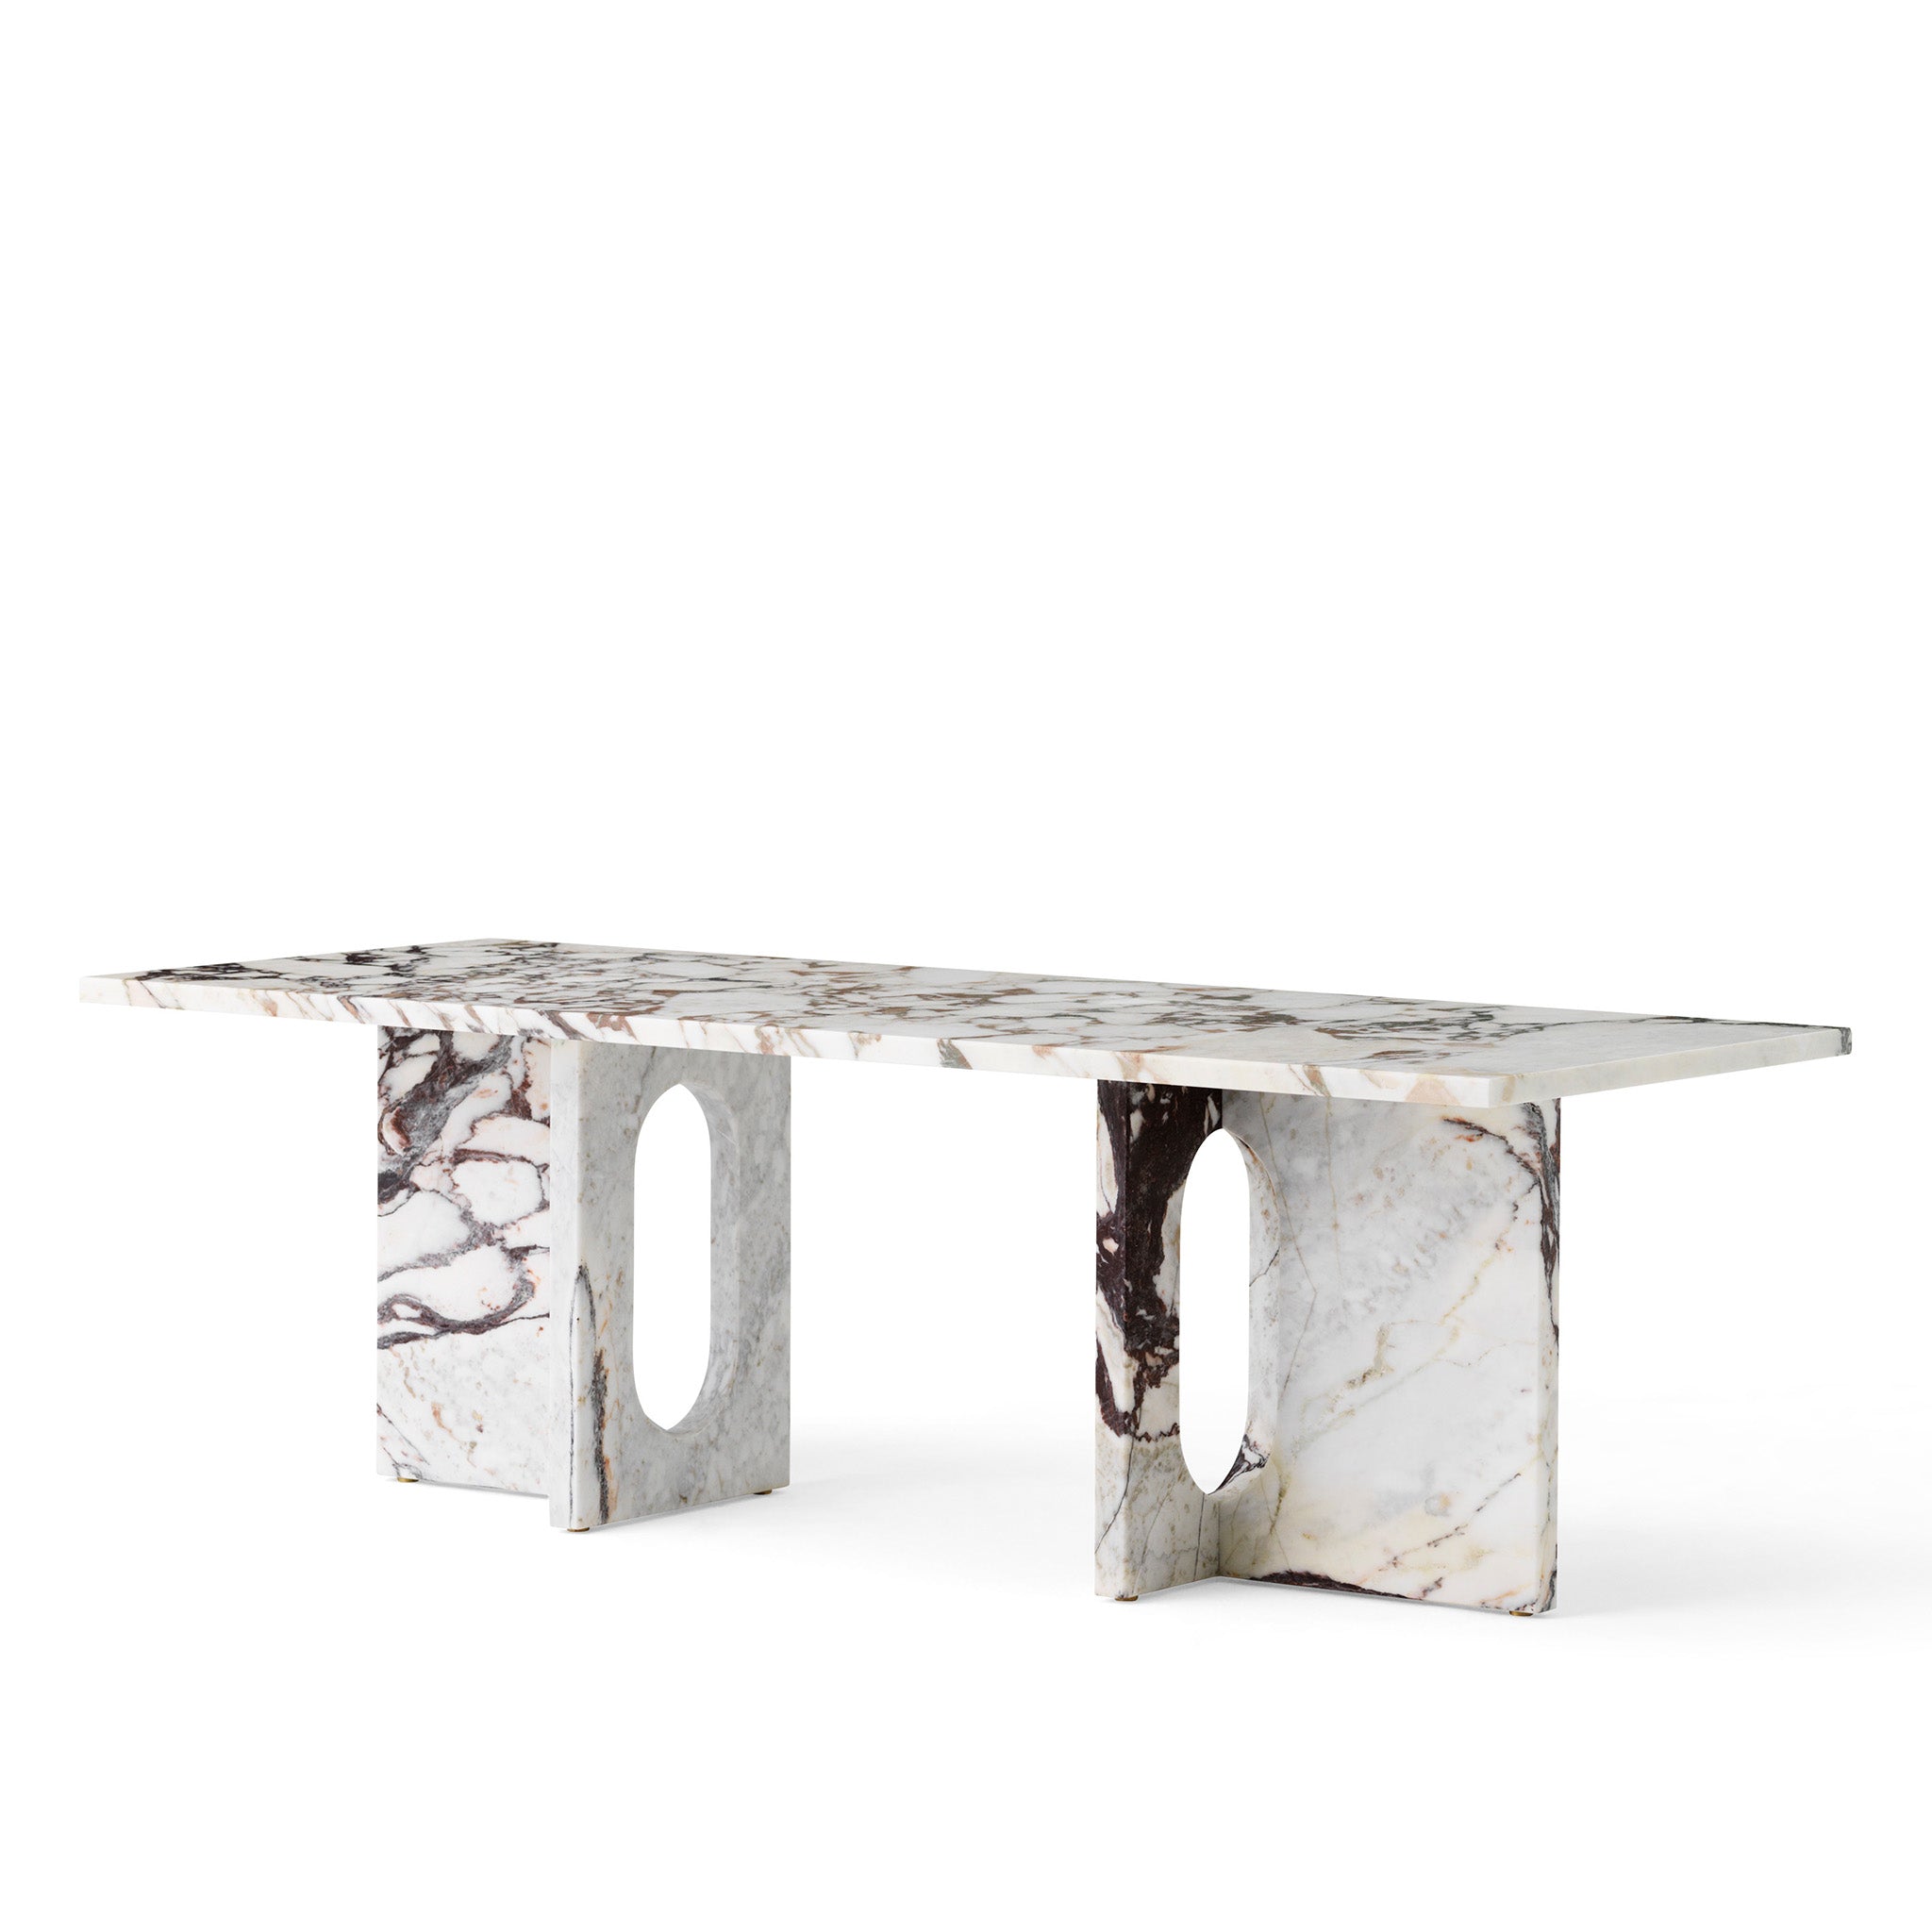 Androgyne Lounge Table - Marble by Danielle Siggerud